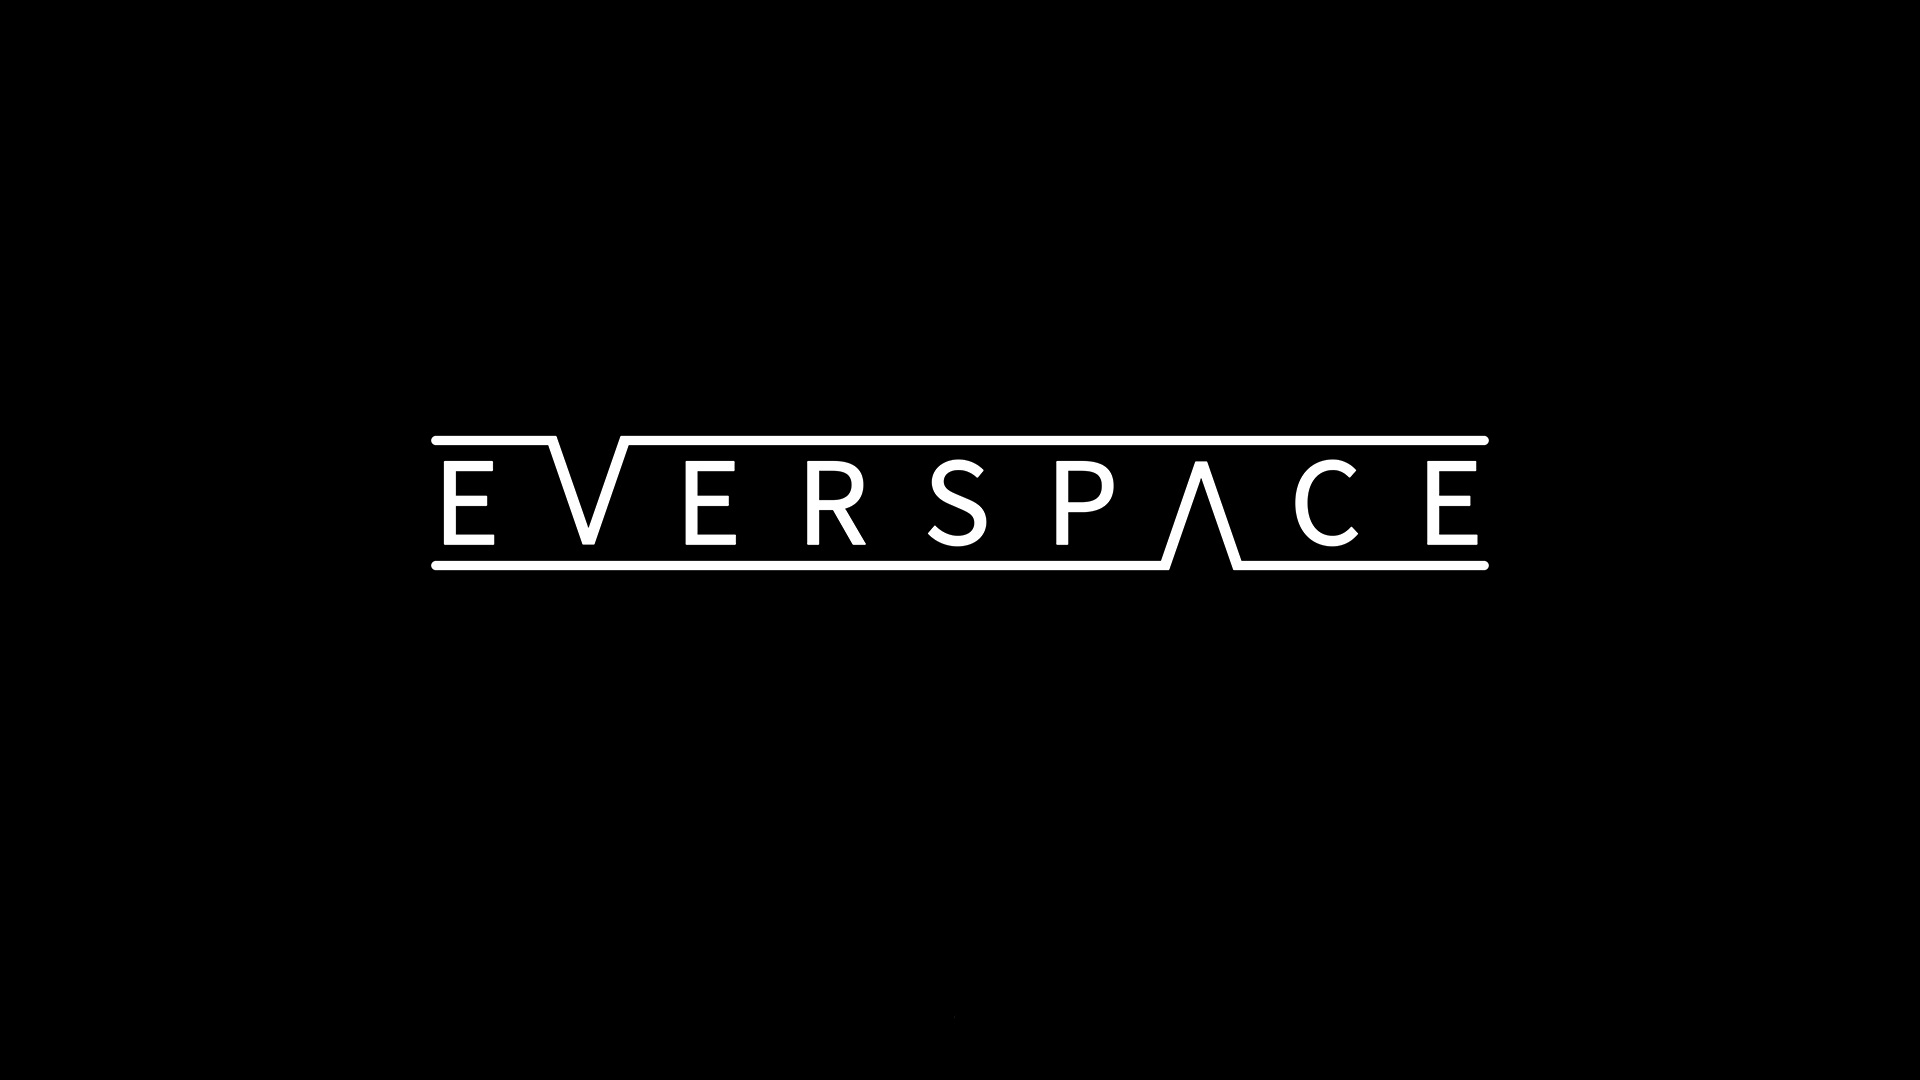 Everspace cover